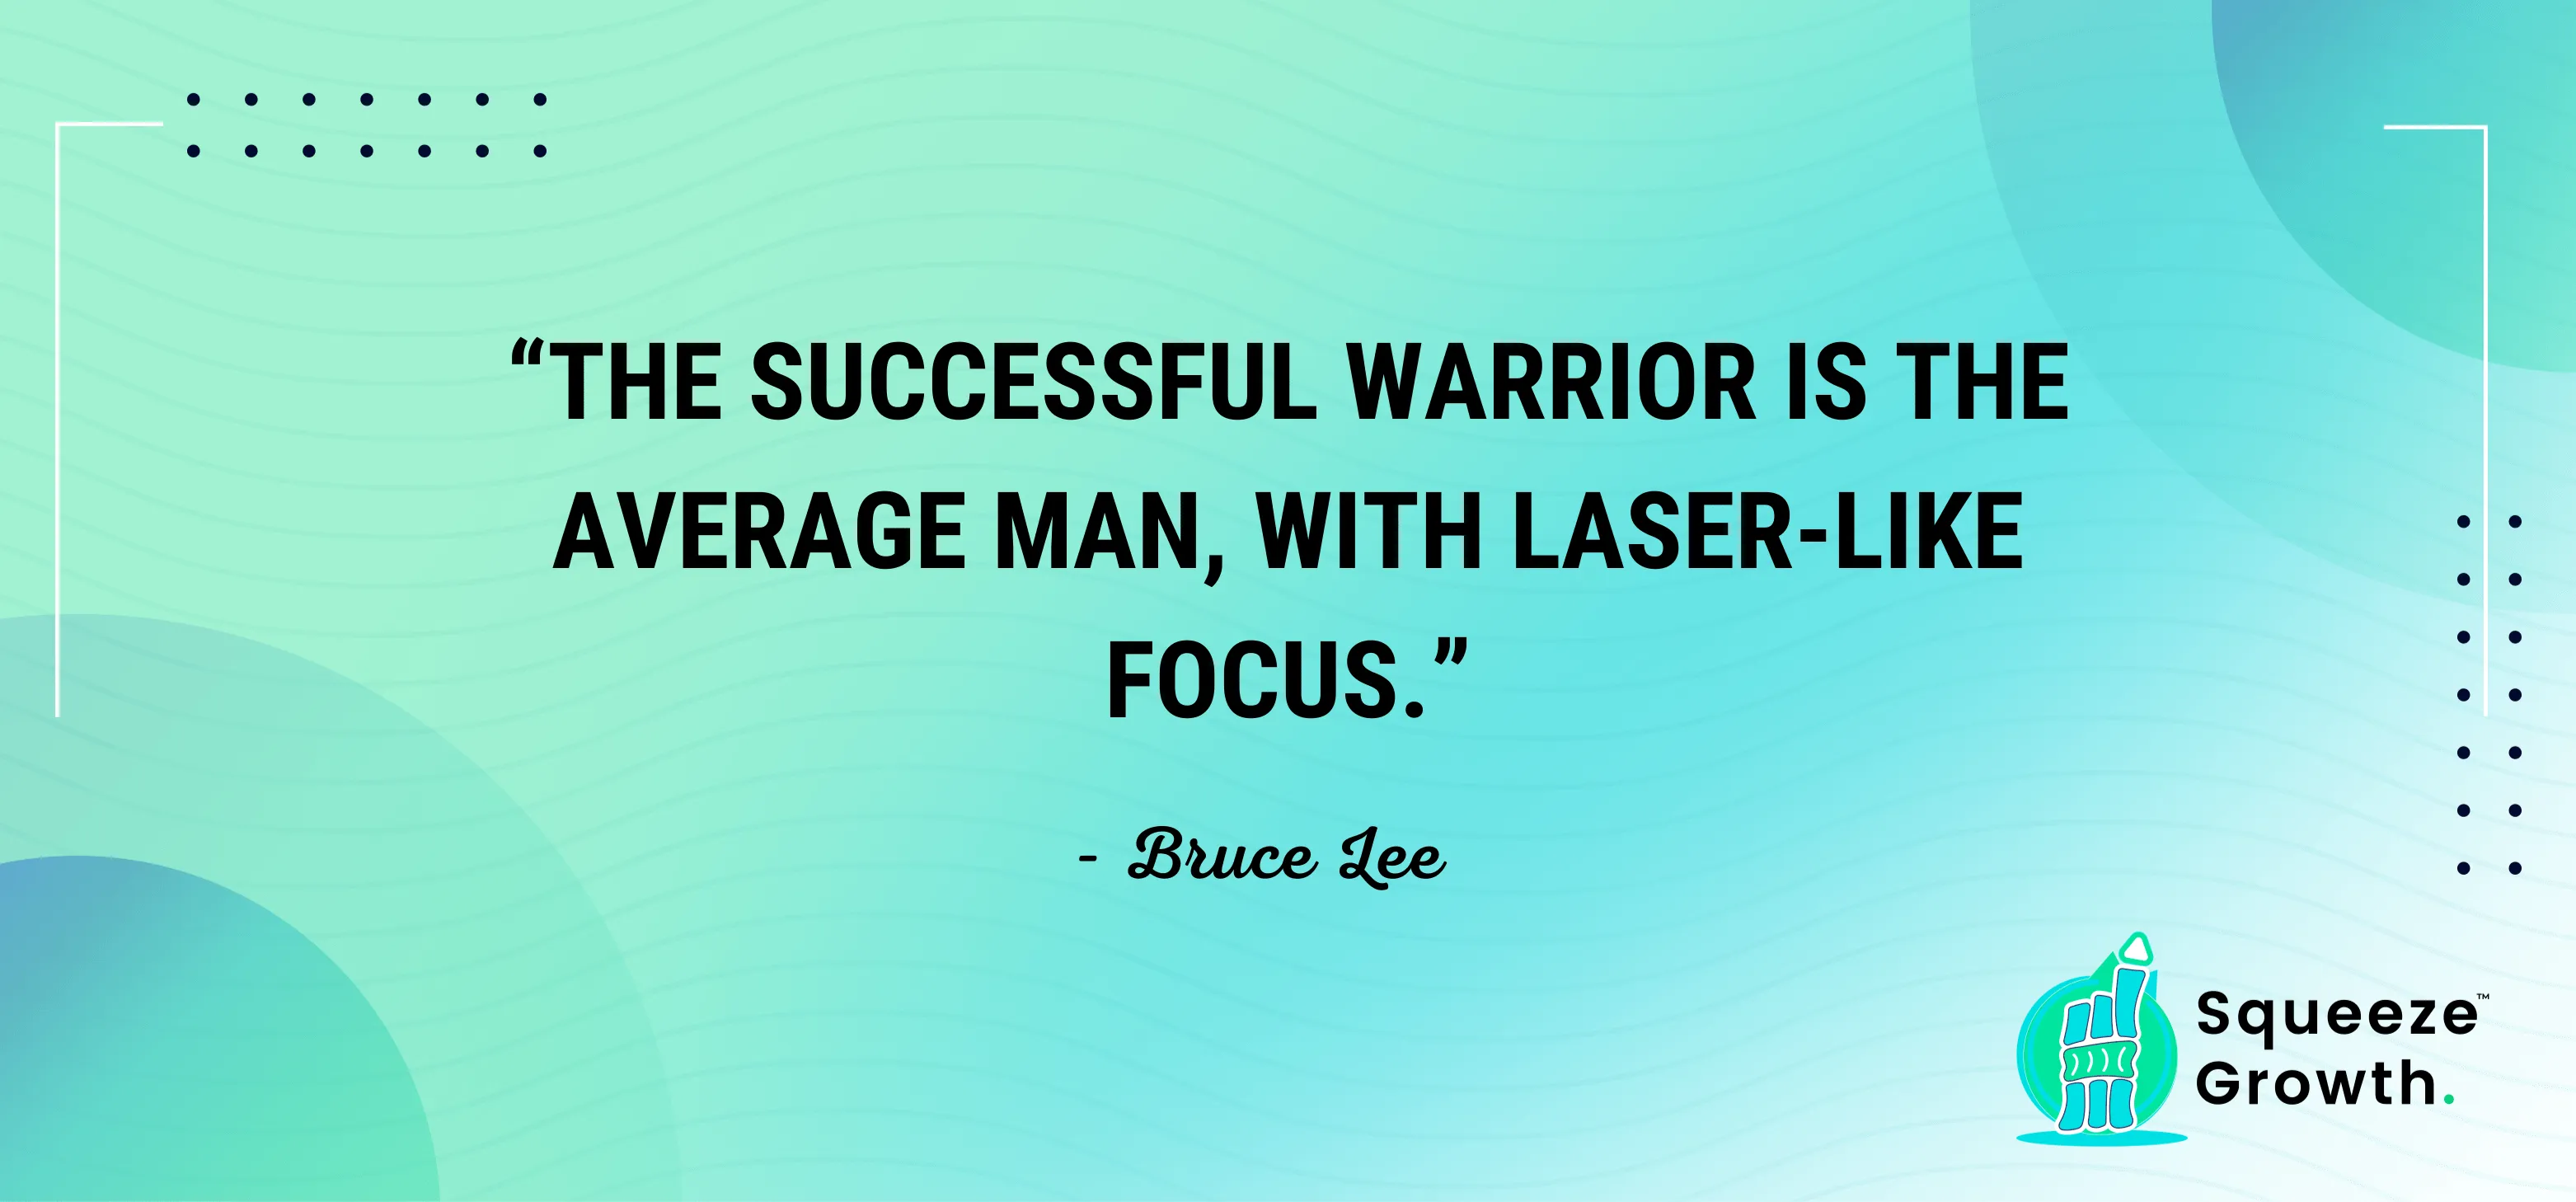 bruce lee on success and focus